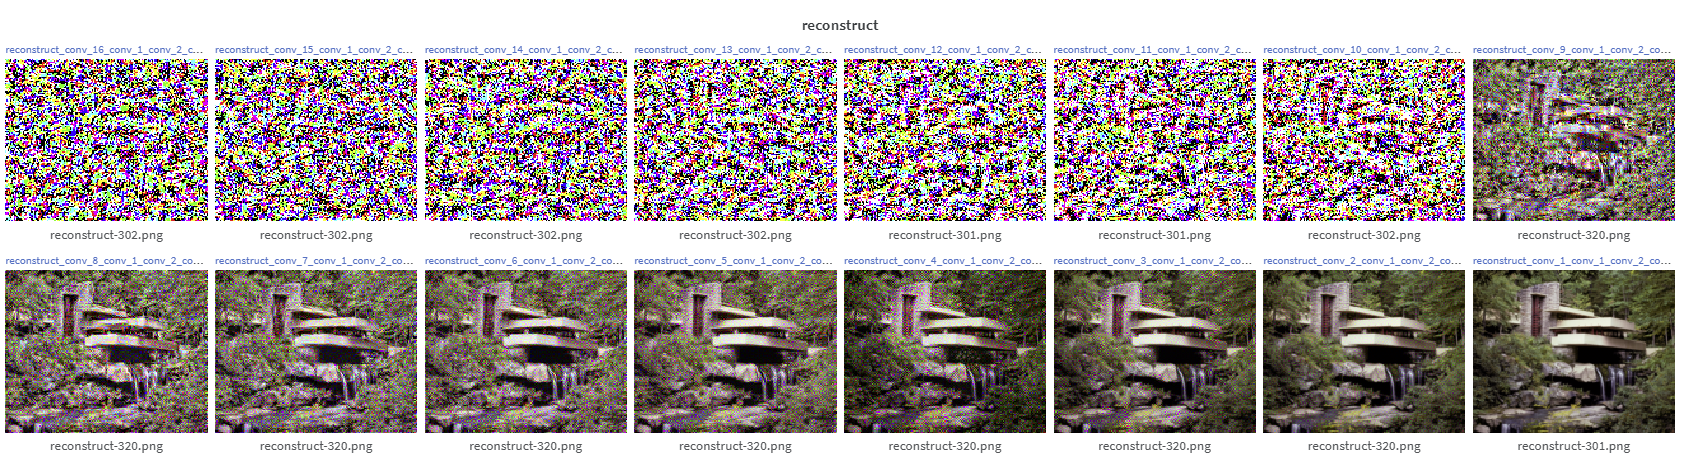 Reconstruct, Content Layer [1 to 16], Top Left (16), Bottom Right (1)